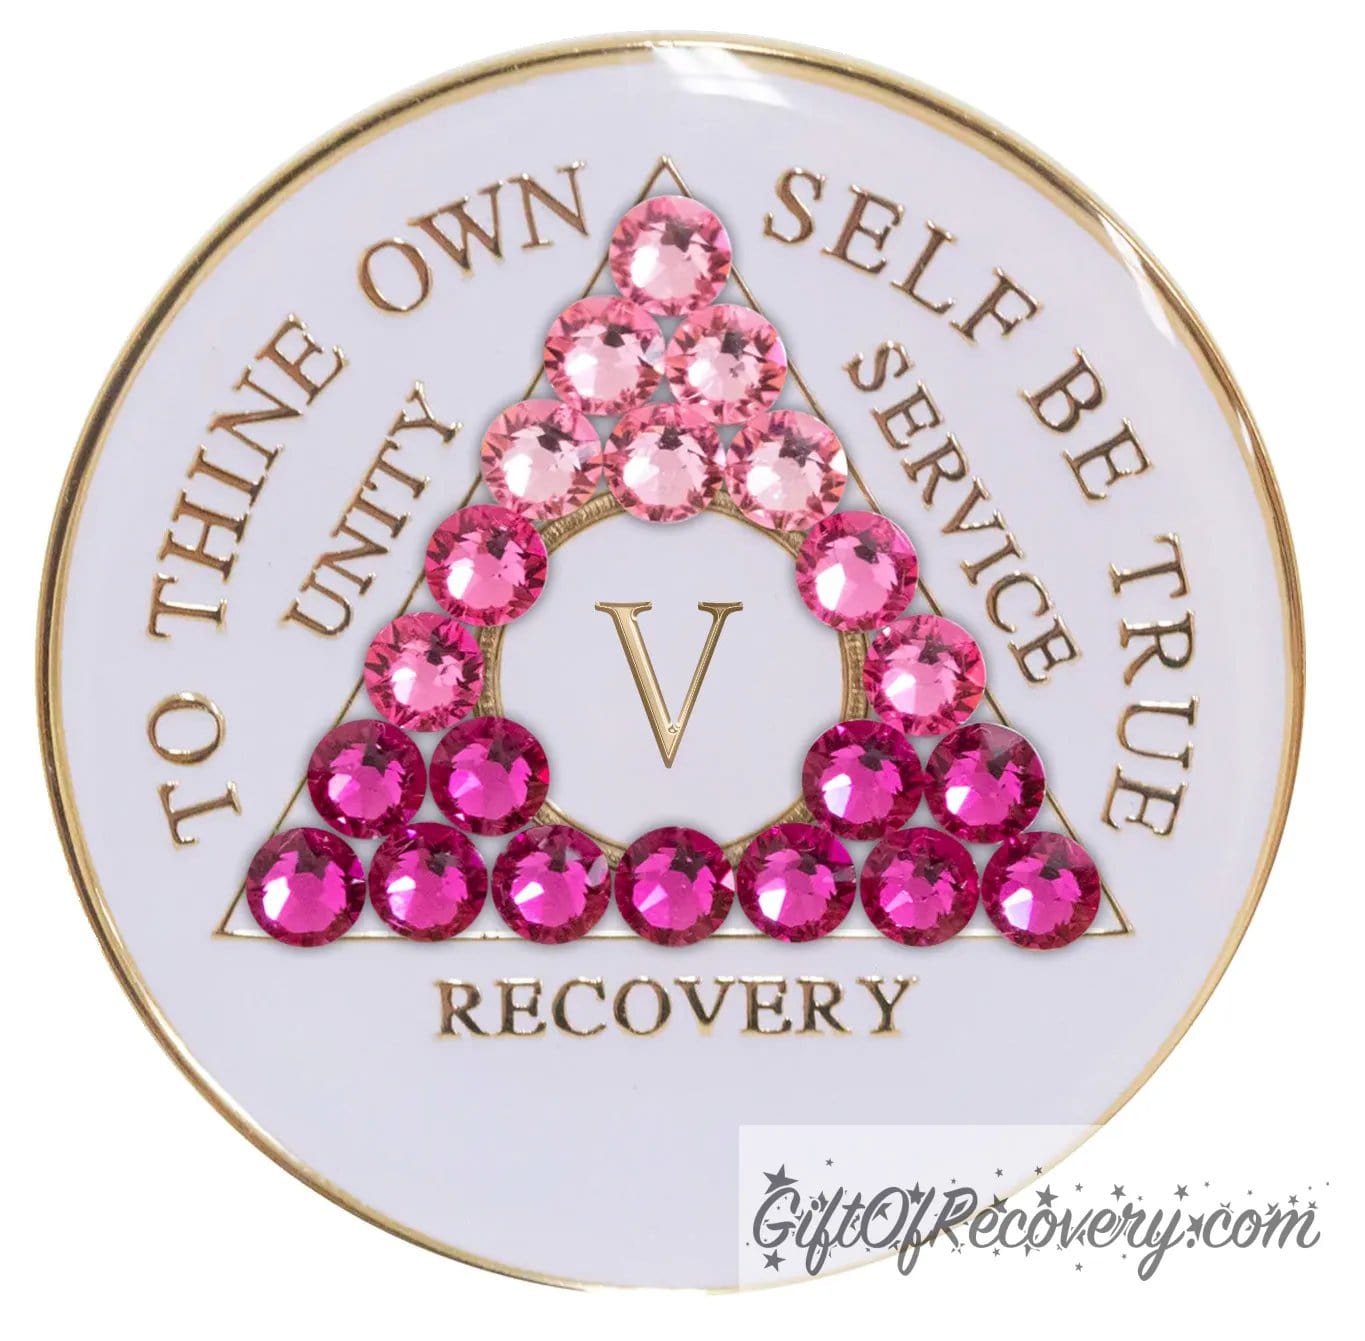 5 year pearl white AA medallion with 21 genuine crystals in the shape of the triangle and ranging from light to dark pink, representing the transformation of your sobriety journey, the AA moto along with the roman numeral and rim of medallion are 14k gold plated brass and sealed with resin for a glossy finish.